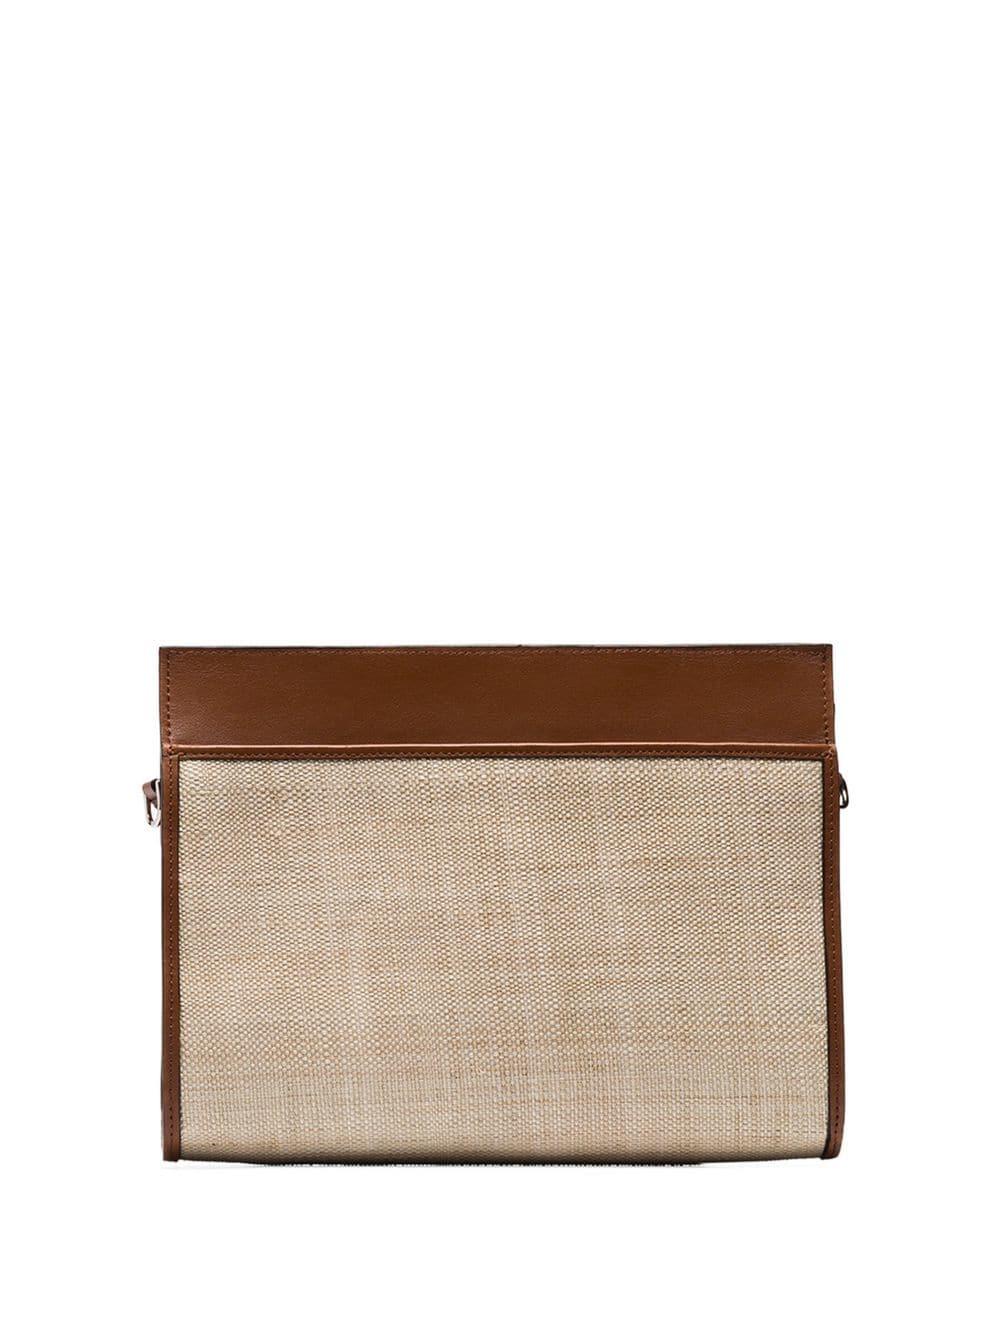 Hunting Season Beige Leather And Straw Clutch Bag in Brown - Lyst